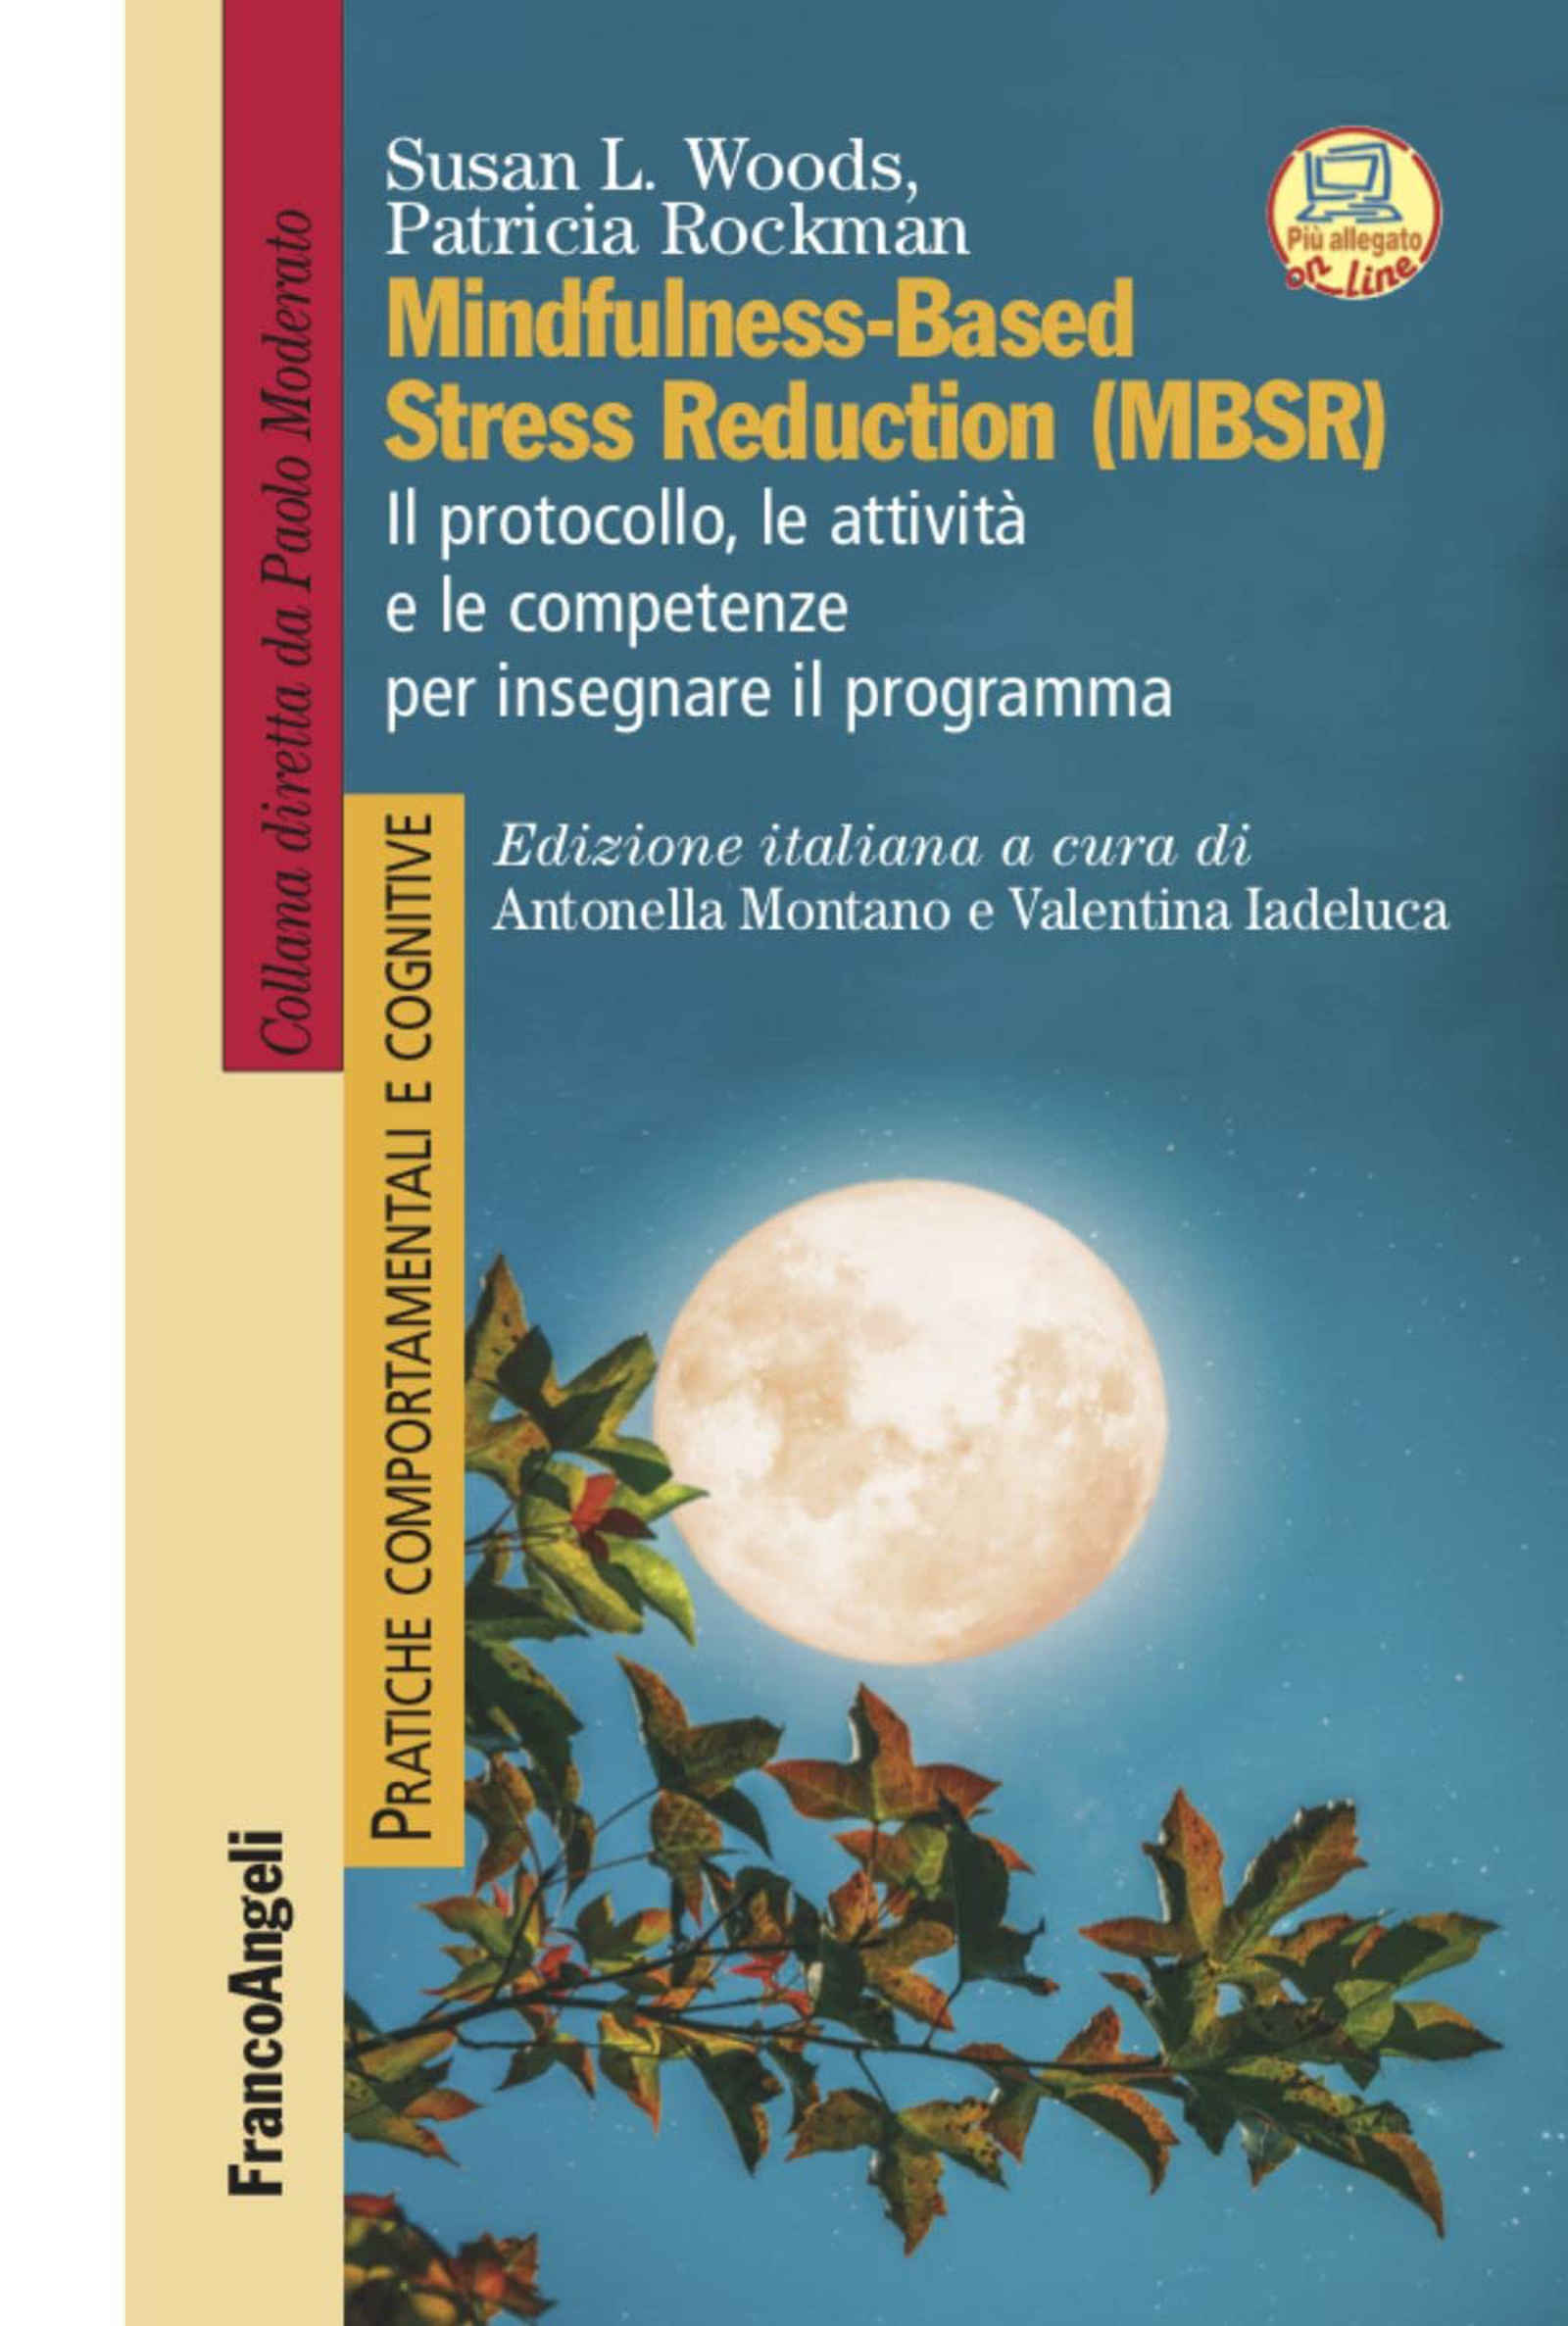 Mindfulness-Based Stress Reduction (MBSR) di Woods e Rockman – Recensione